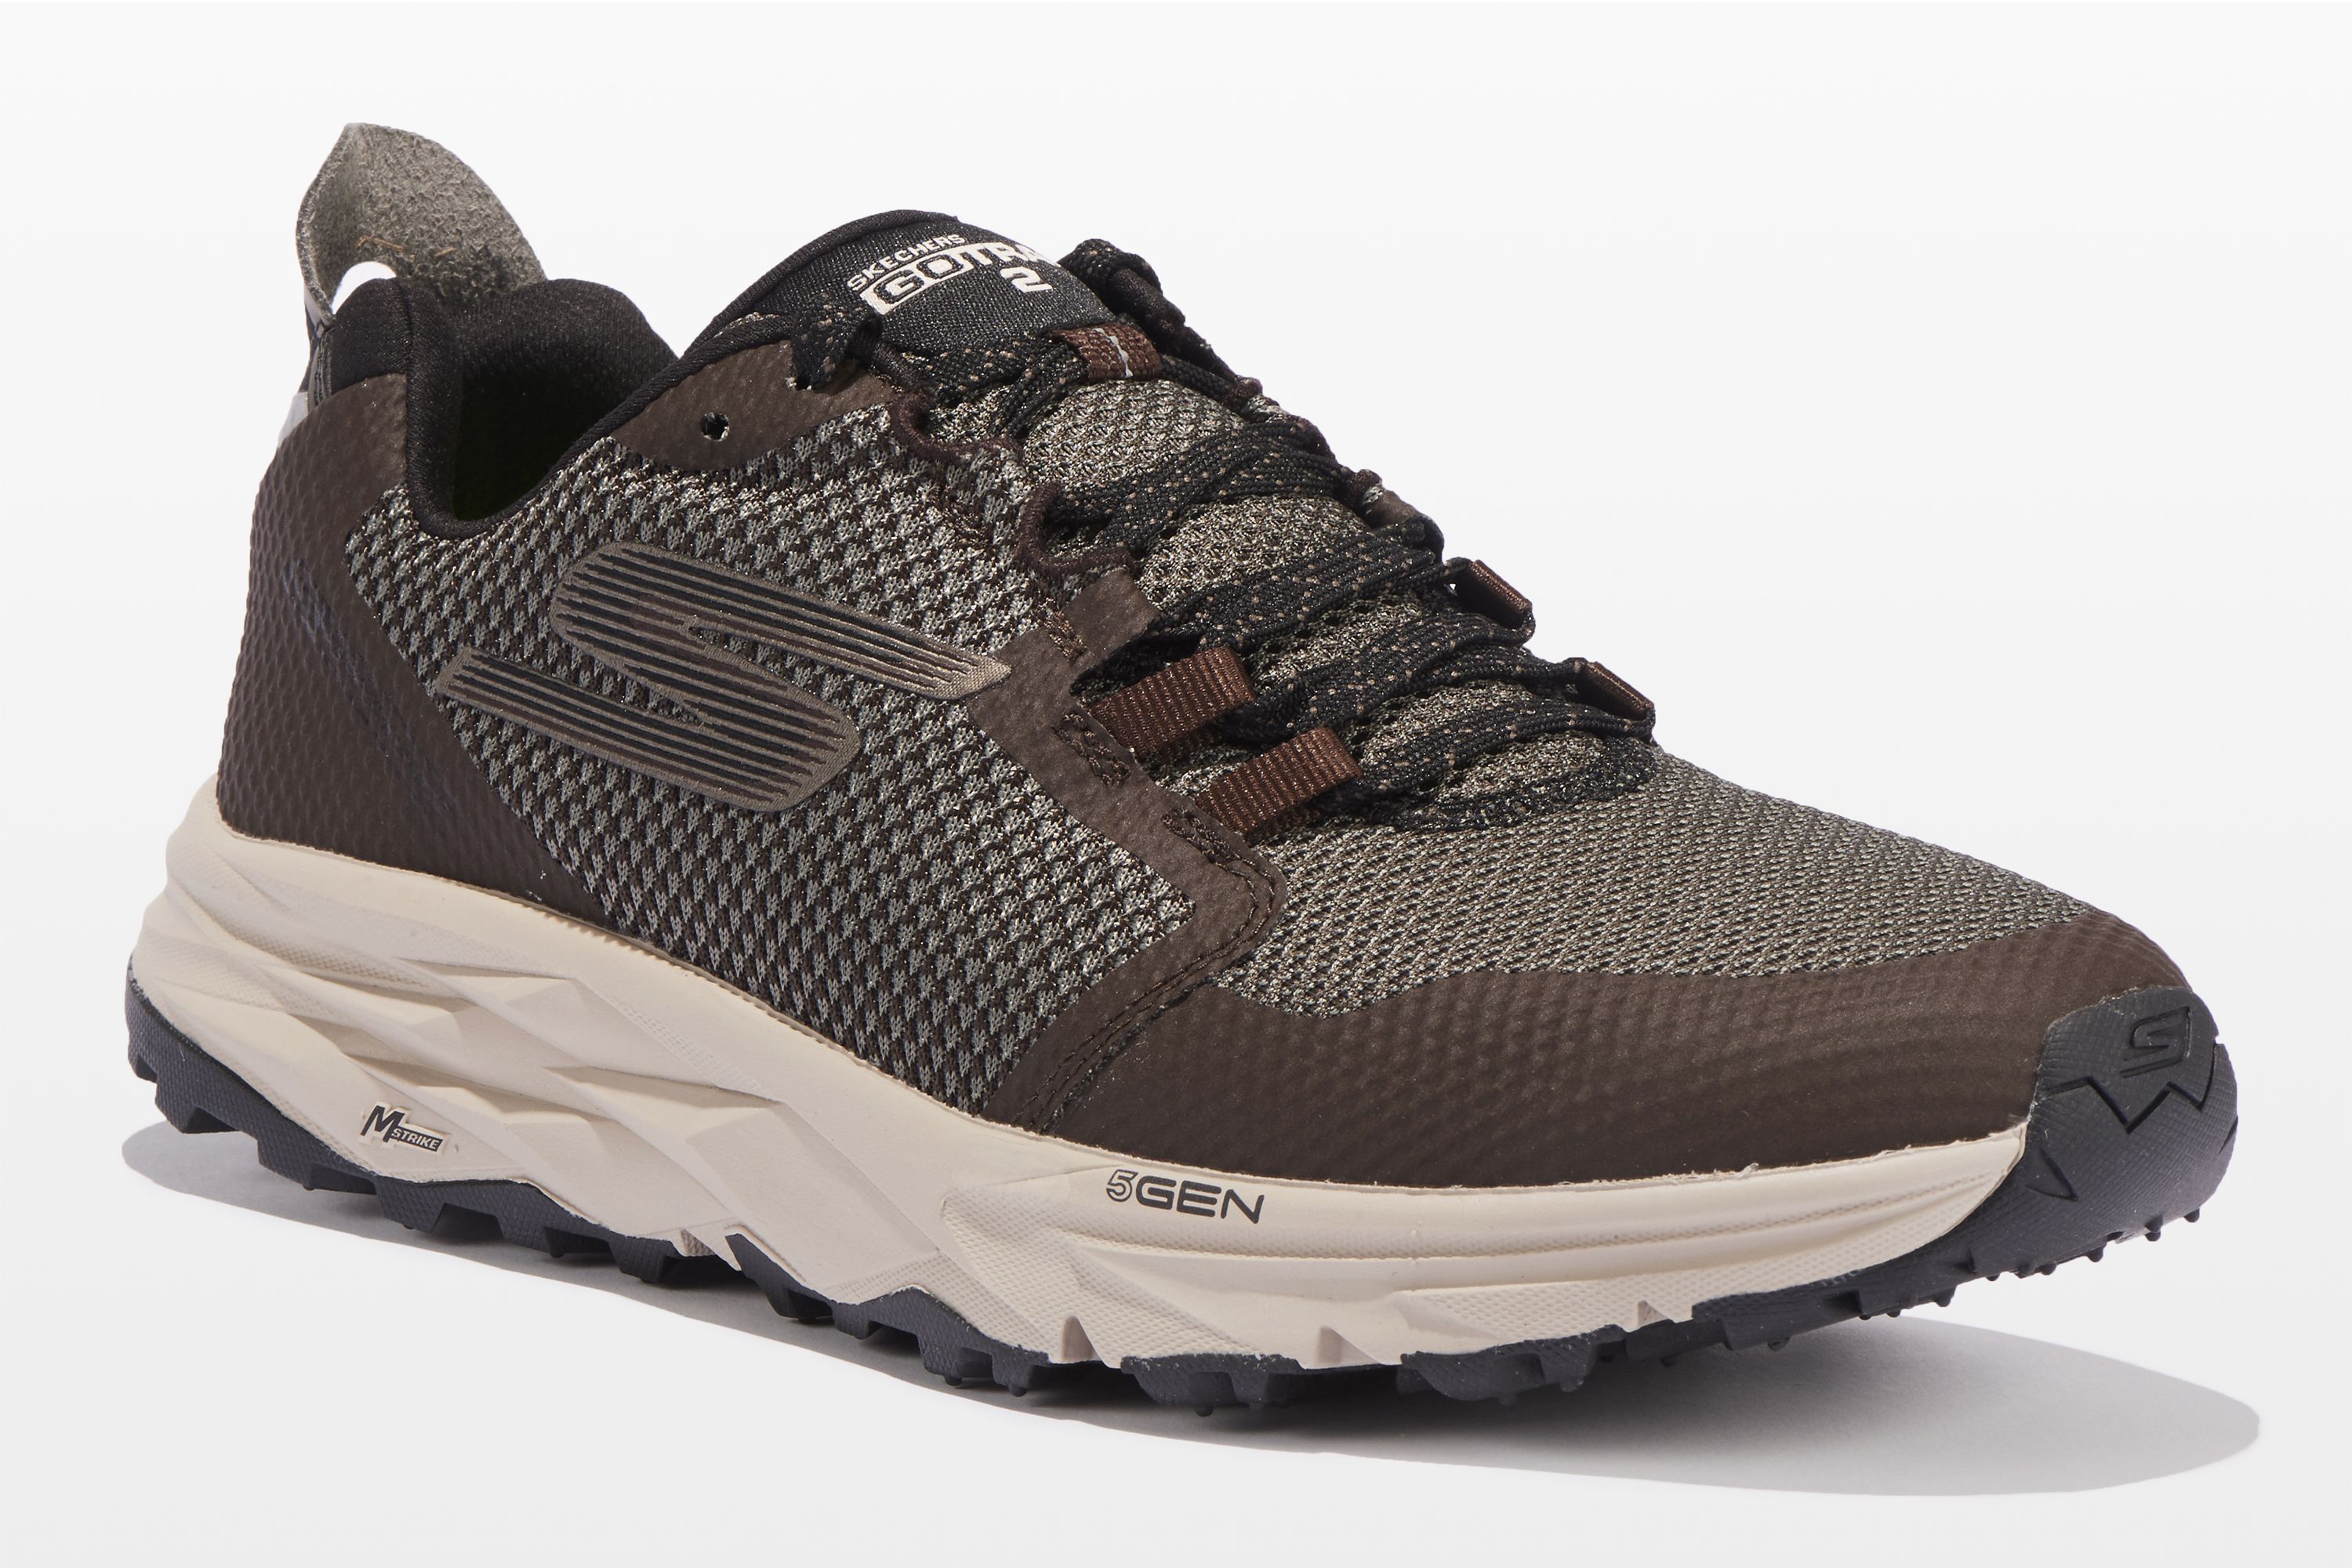 Skechers GOtrail 2 Review 2018 | A Top 